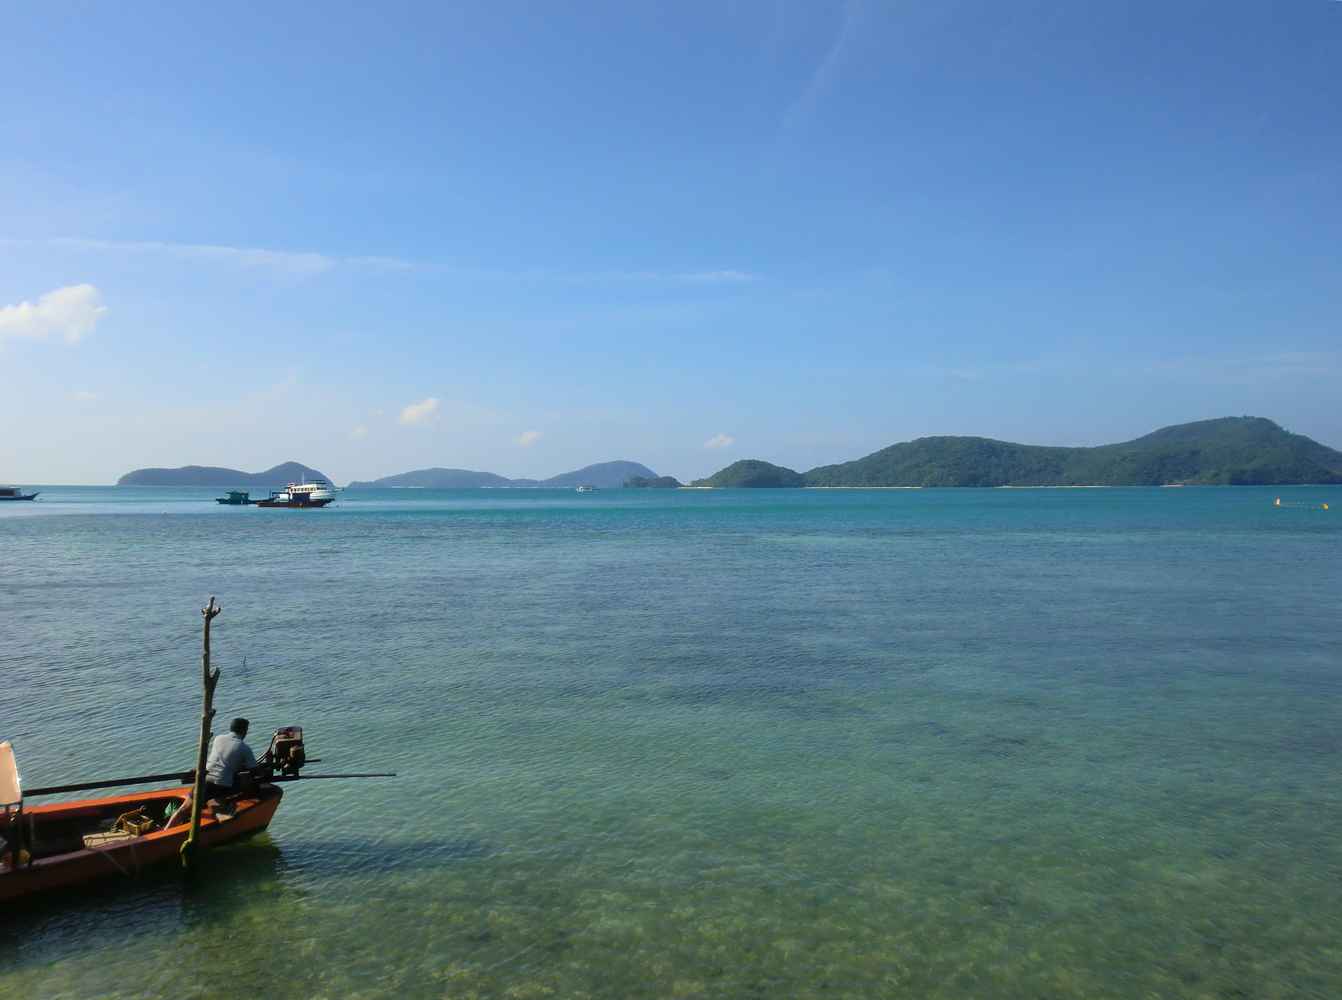 Derechos: Whym, Wikimedia Commons, CC BY-SA 3.0. https://commons.wikimedia.org/wiki/File:Cape_Panwa,_Phuket_sea_and_boat_2014.JPG